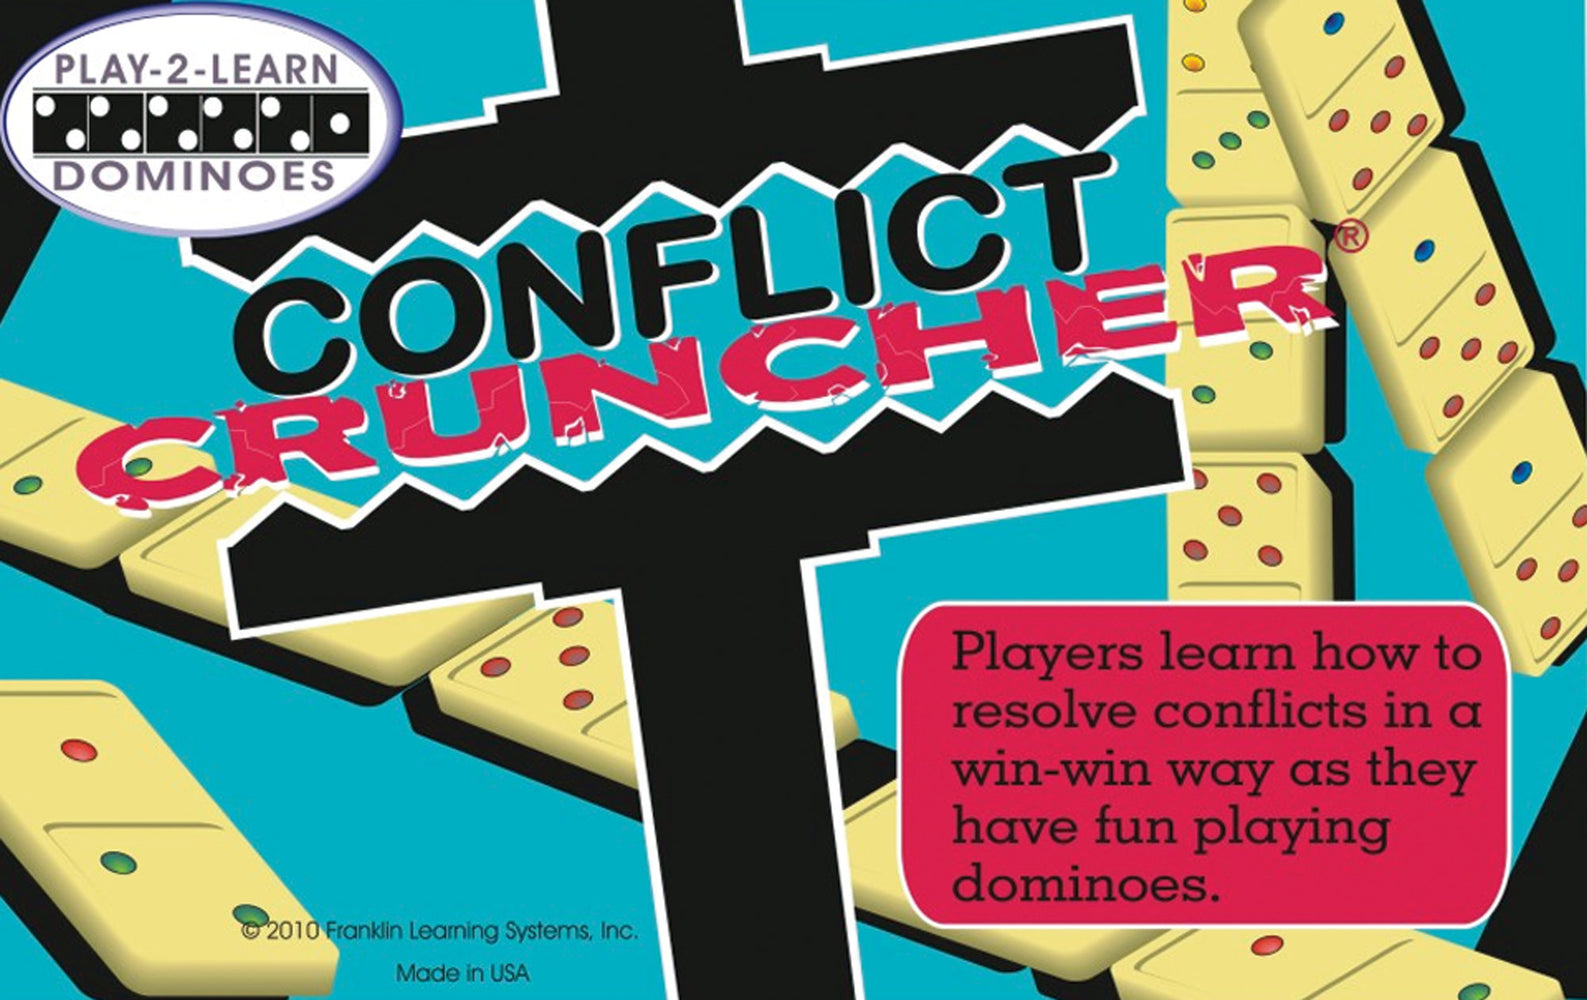 Play 2 Learn Dominoes on Bullywise Game Childswork/Childsplay — Childs Work  Childs Play